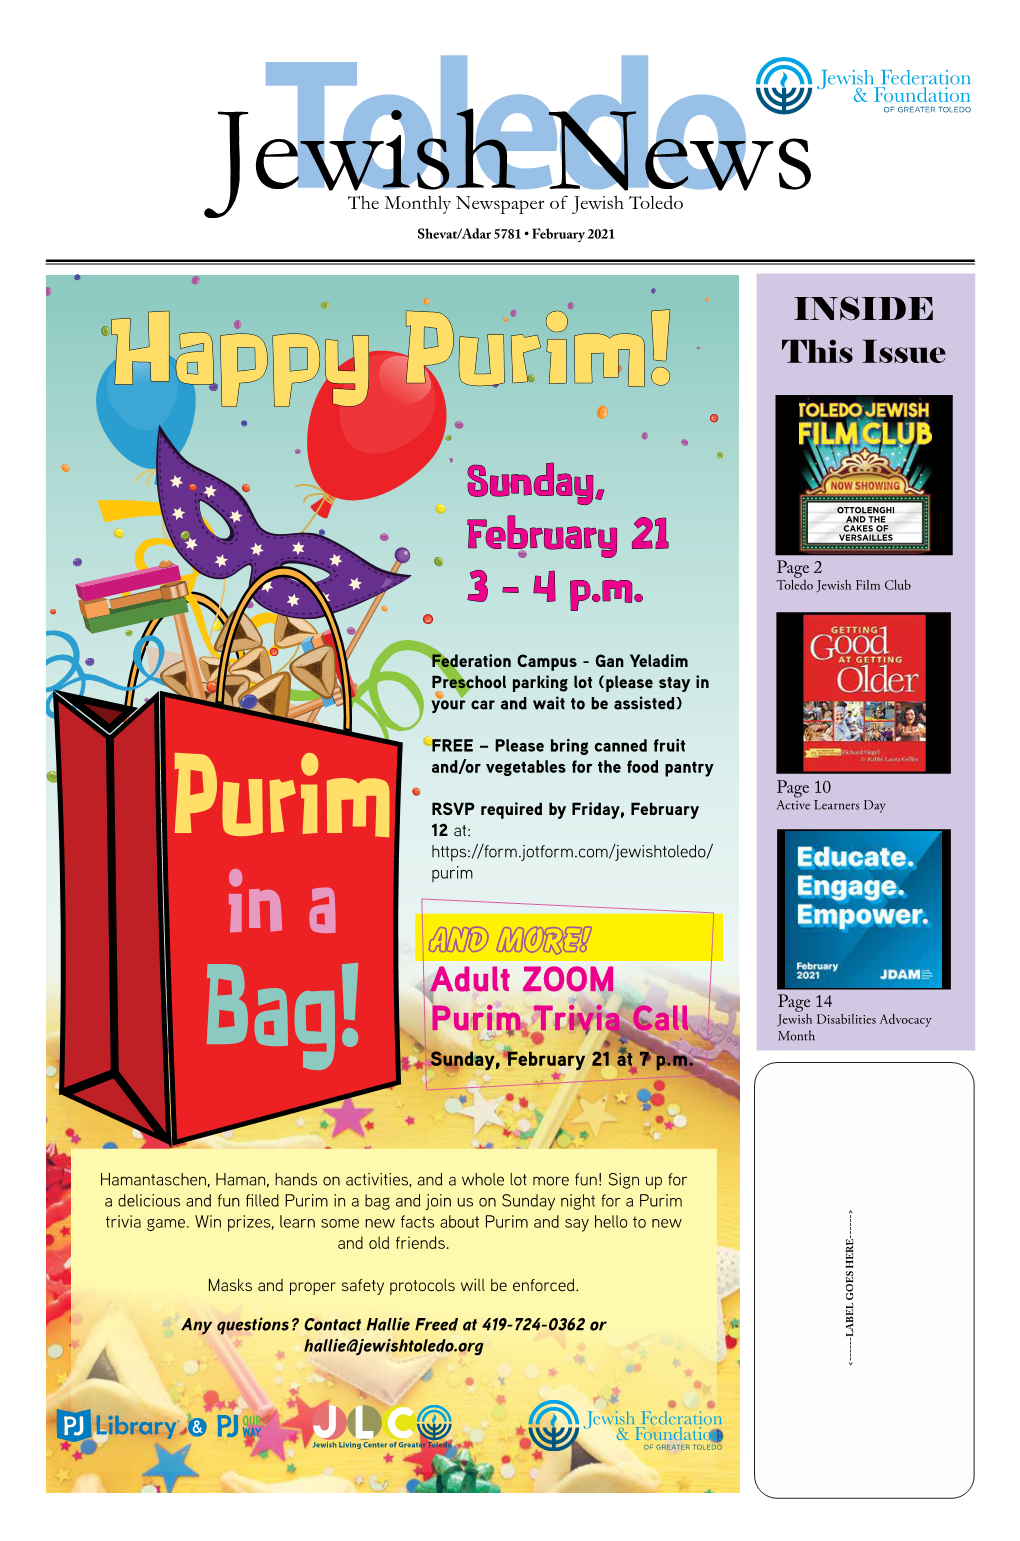 February 2021 5781•February Shevat/Adar and MORE! Purim Trivia Call Adult ZOOM Sunday, February 21At7p.M